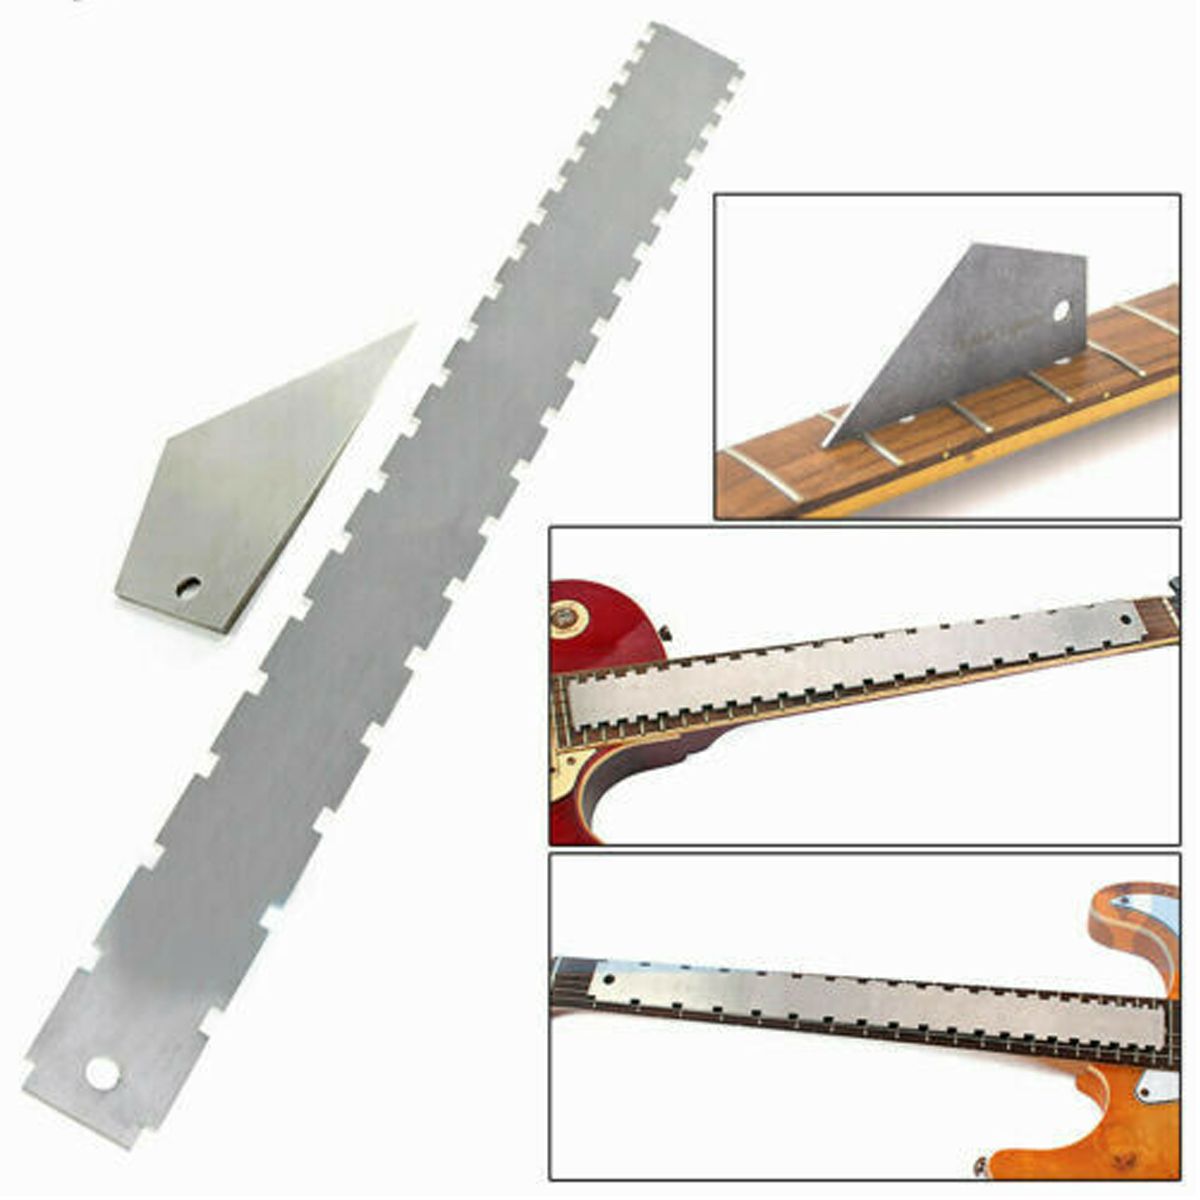 Guitar-Neck-Notched-Straight-Edge--Fret-Rocker-Luthier-Tools-For-Electric-Guitars-1638575